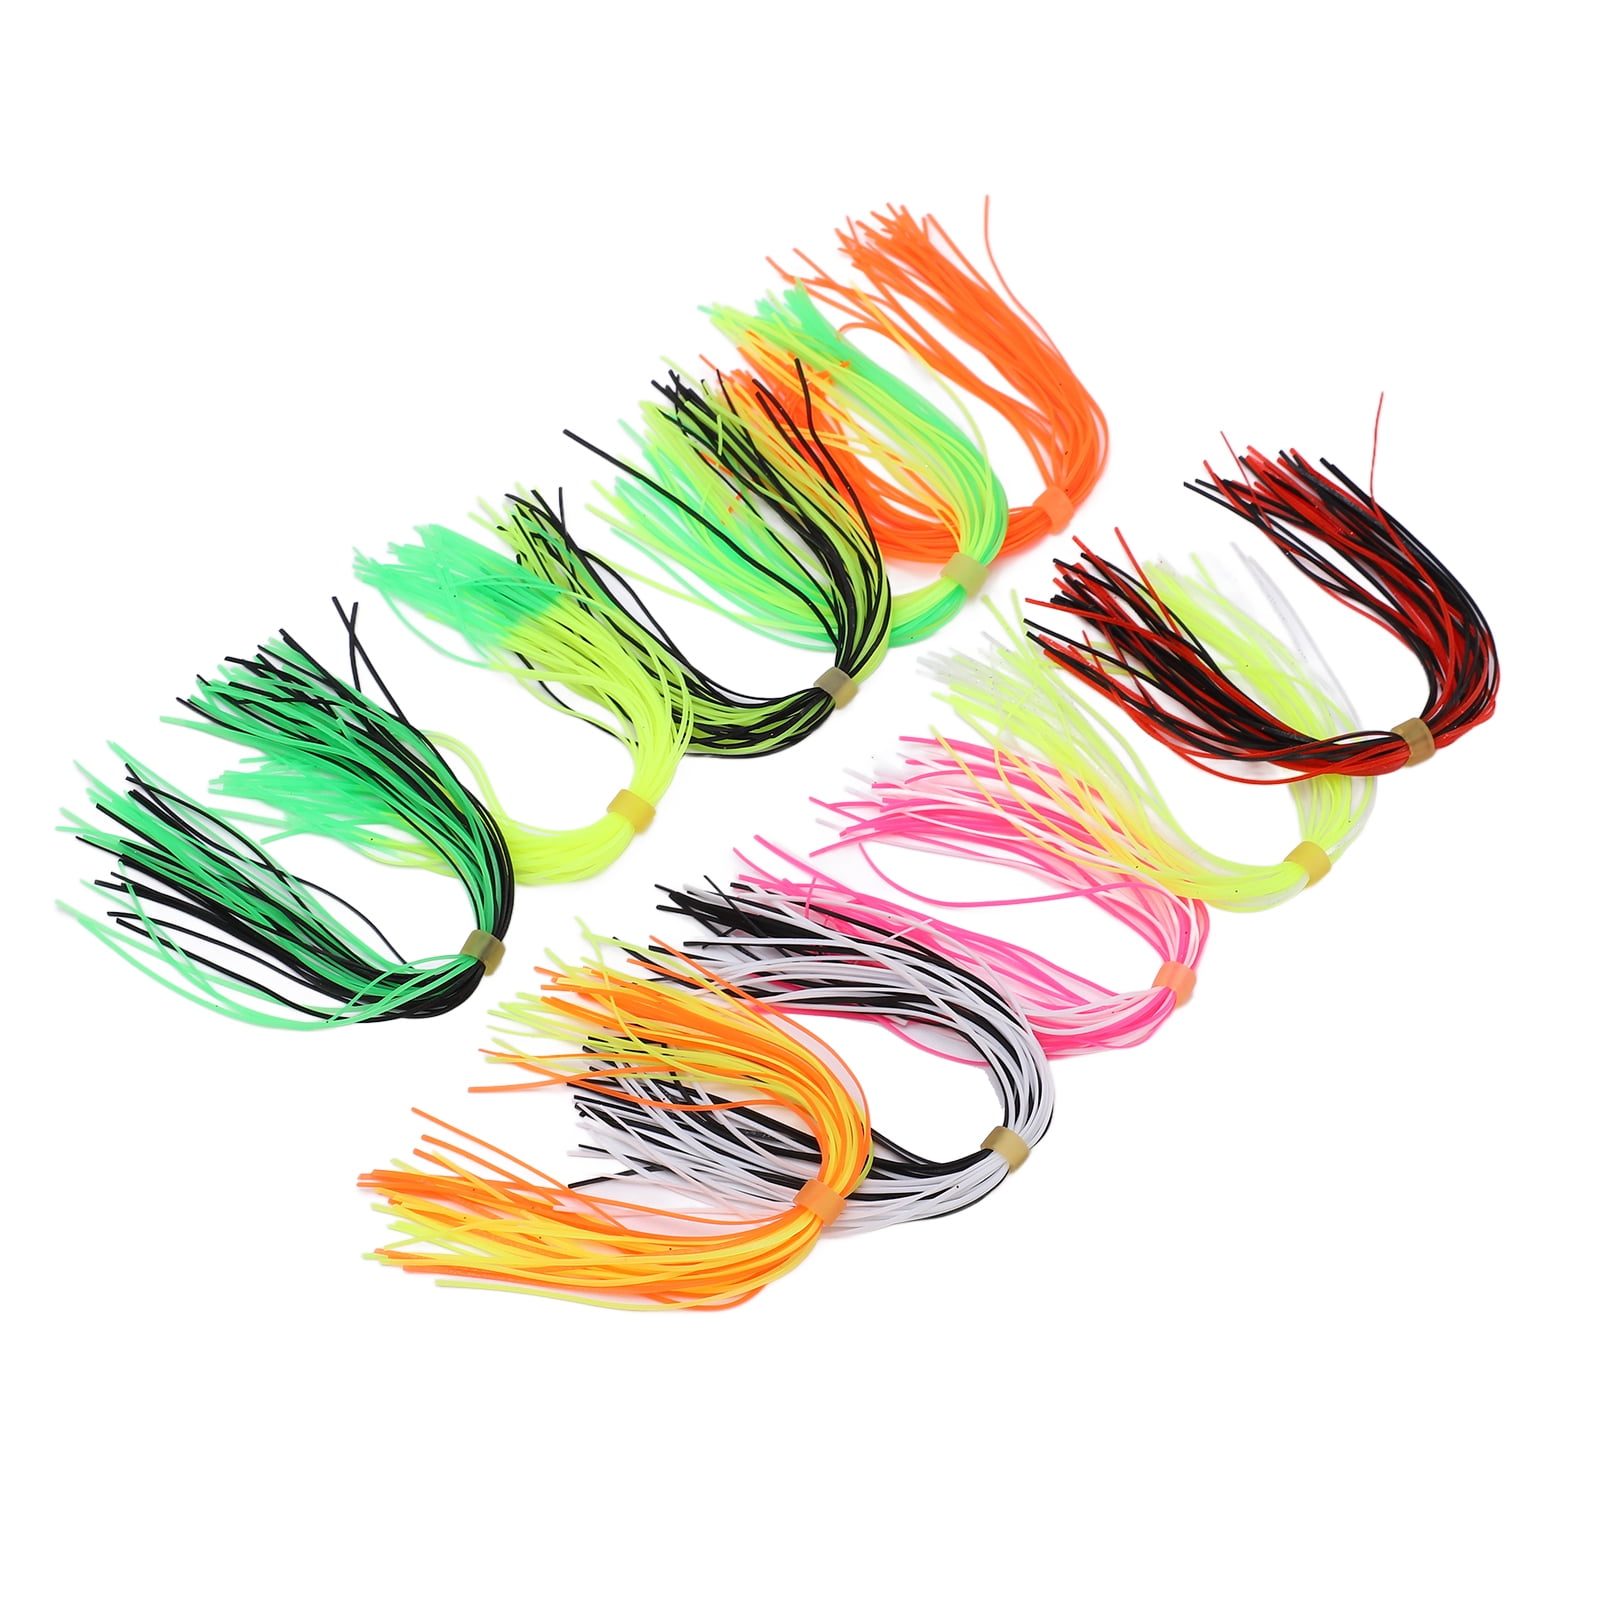 AGOOL Silicone Jig Skirts DIY Fishing Jig Lures 6/18/30 Bundles 50 Strands Rubber Bait Spinnerbaits Buzzbaits Spoon Blade Squid Jig Replacement Skirt